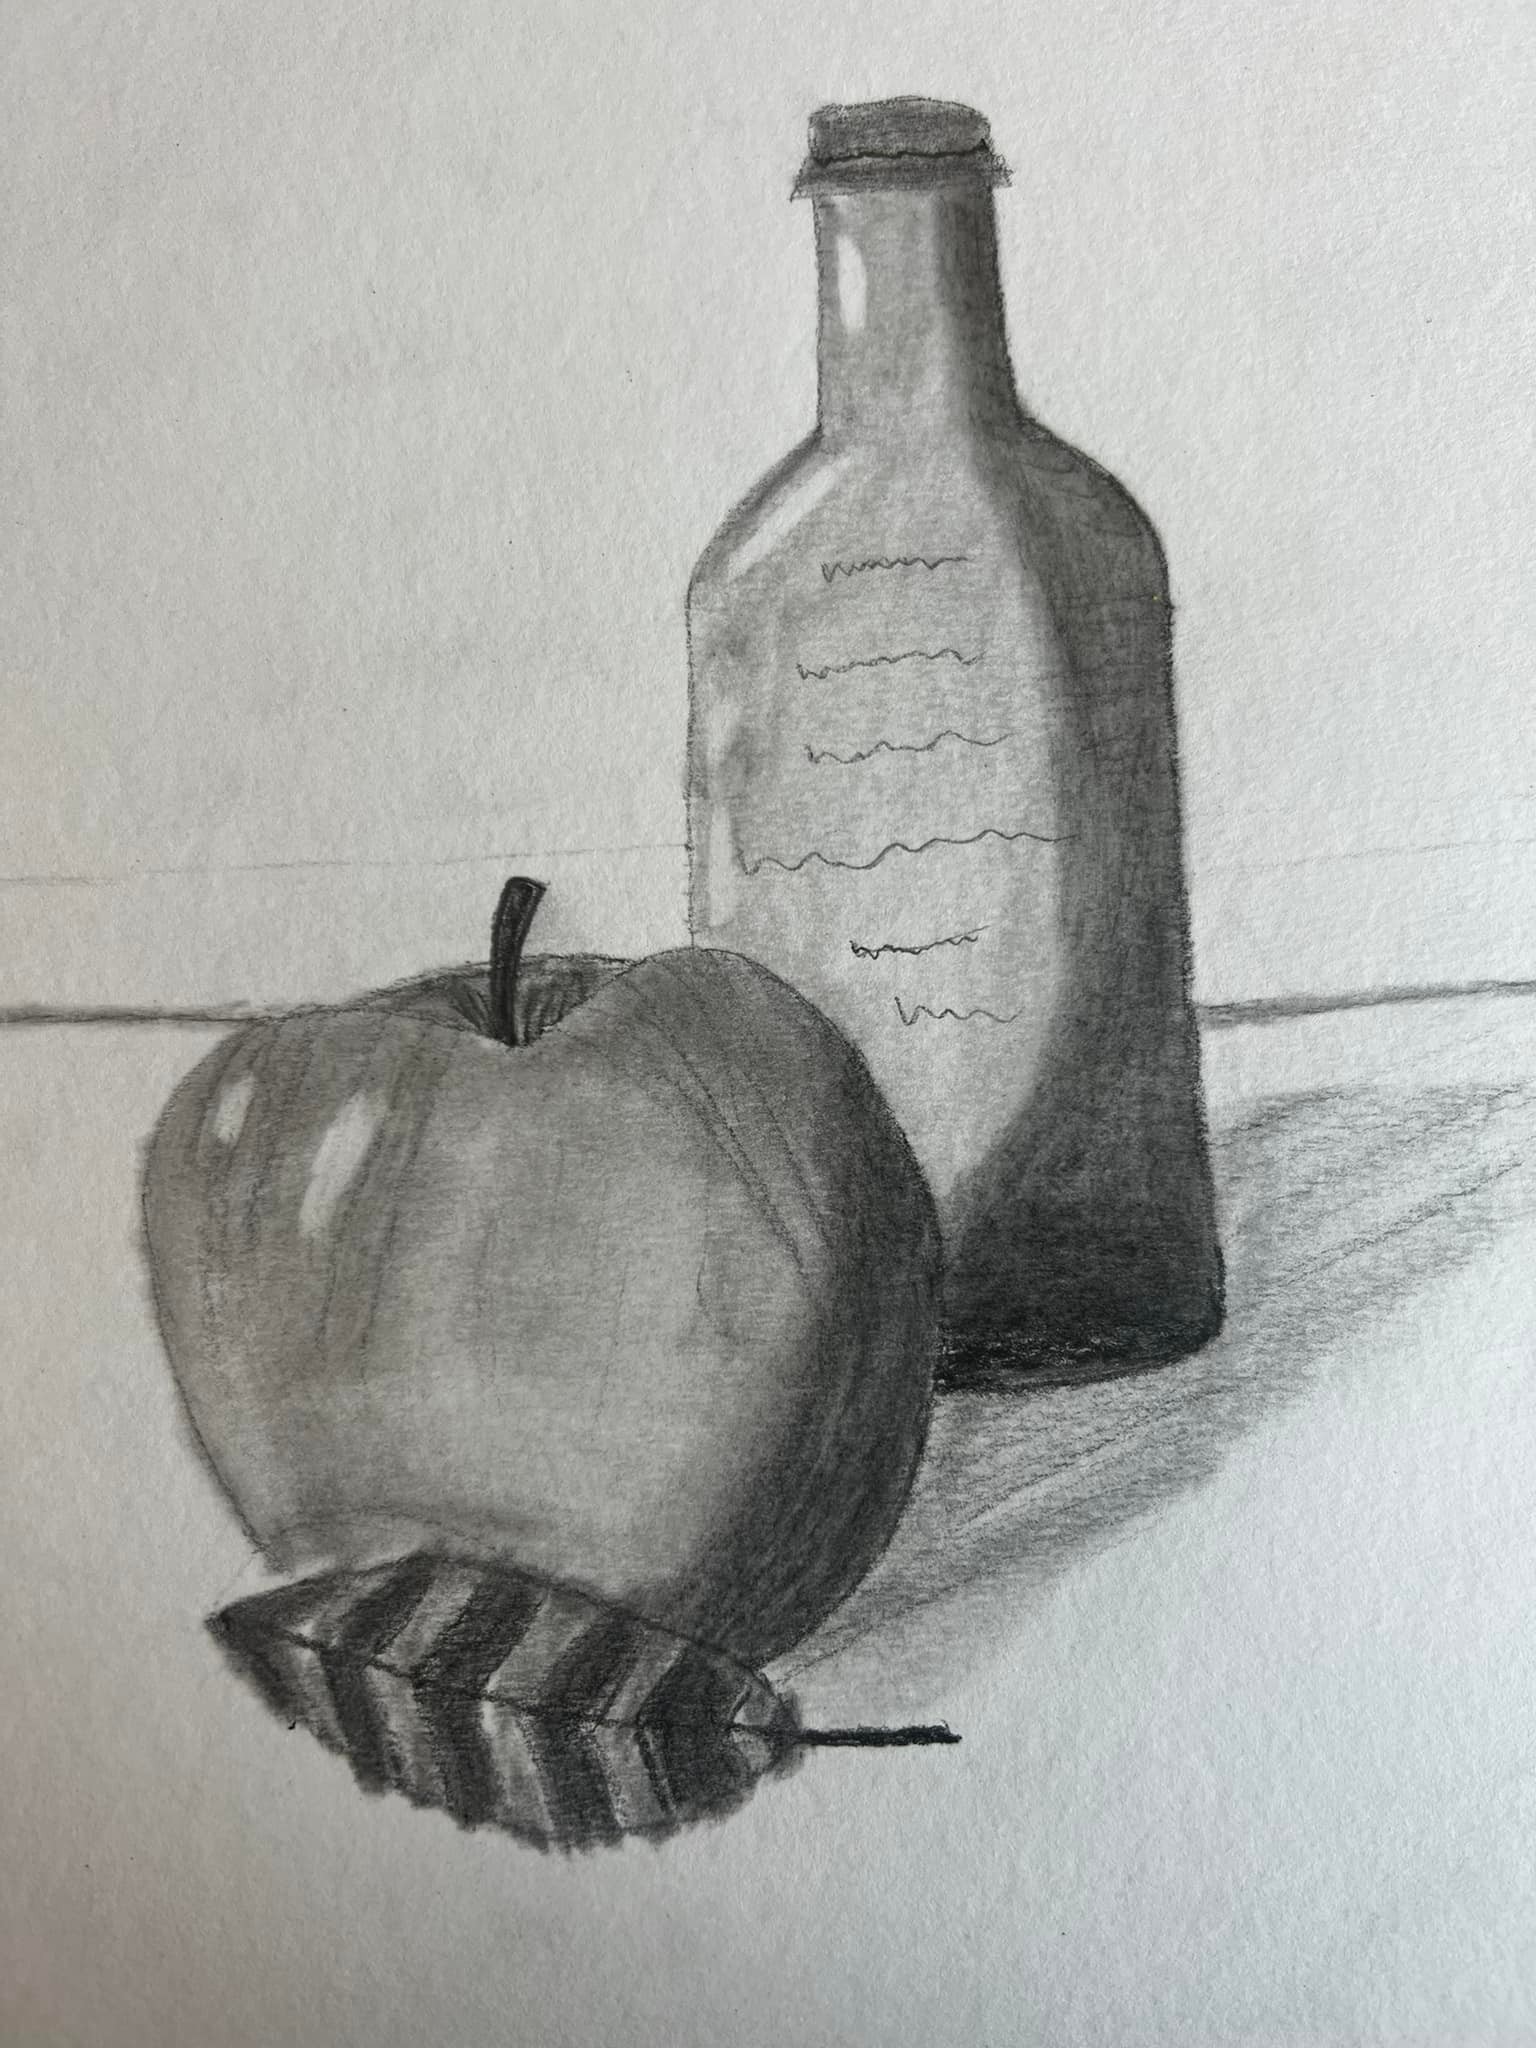 Pencil drawing of apple and a bottle